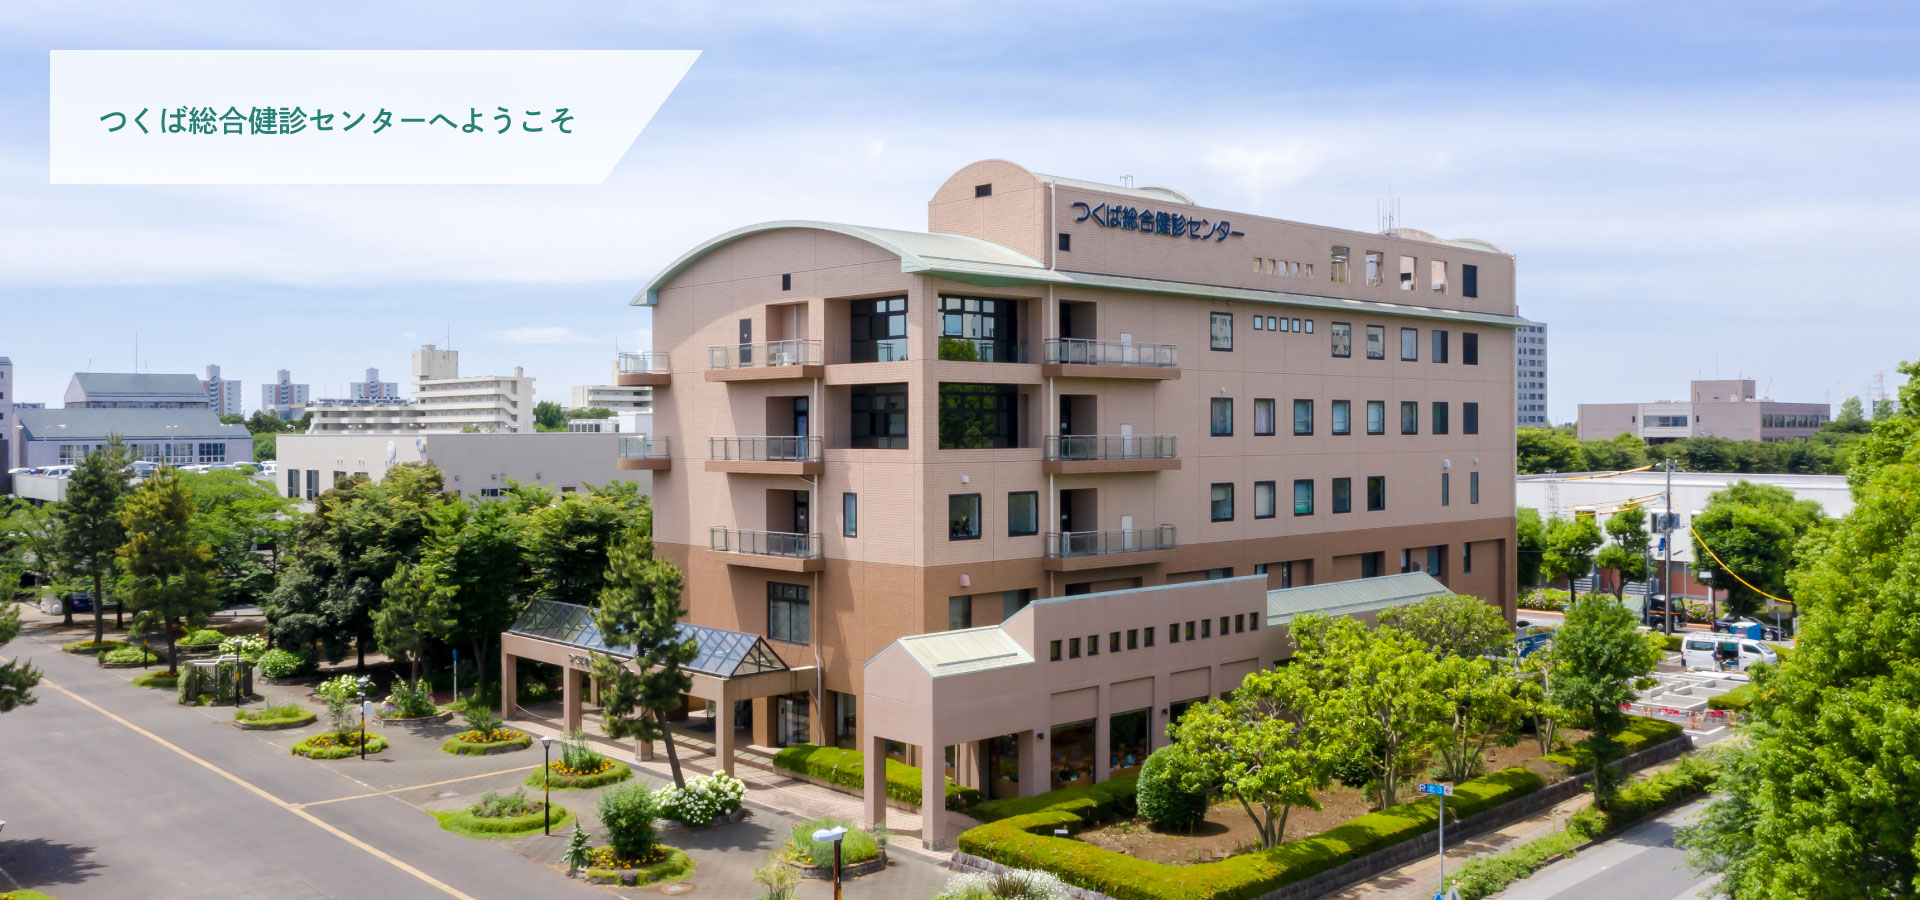 Welcome to the Tsukuba General Health Checkup Center We aim for comprehensive health management Providing higher quality health checkups Contributing to the spread and development of preventive medicine